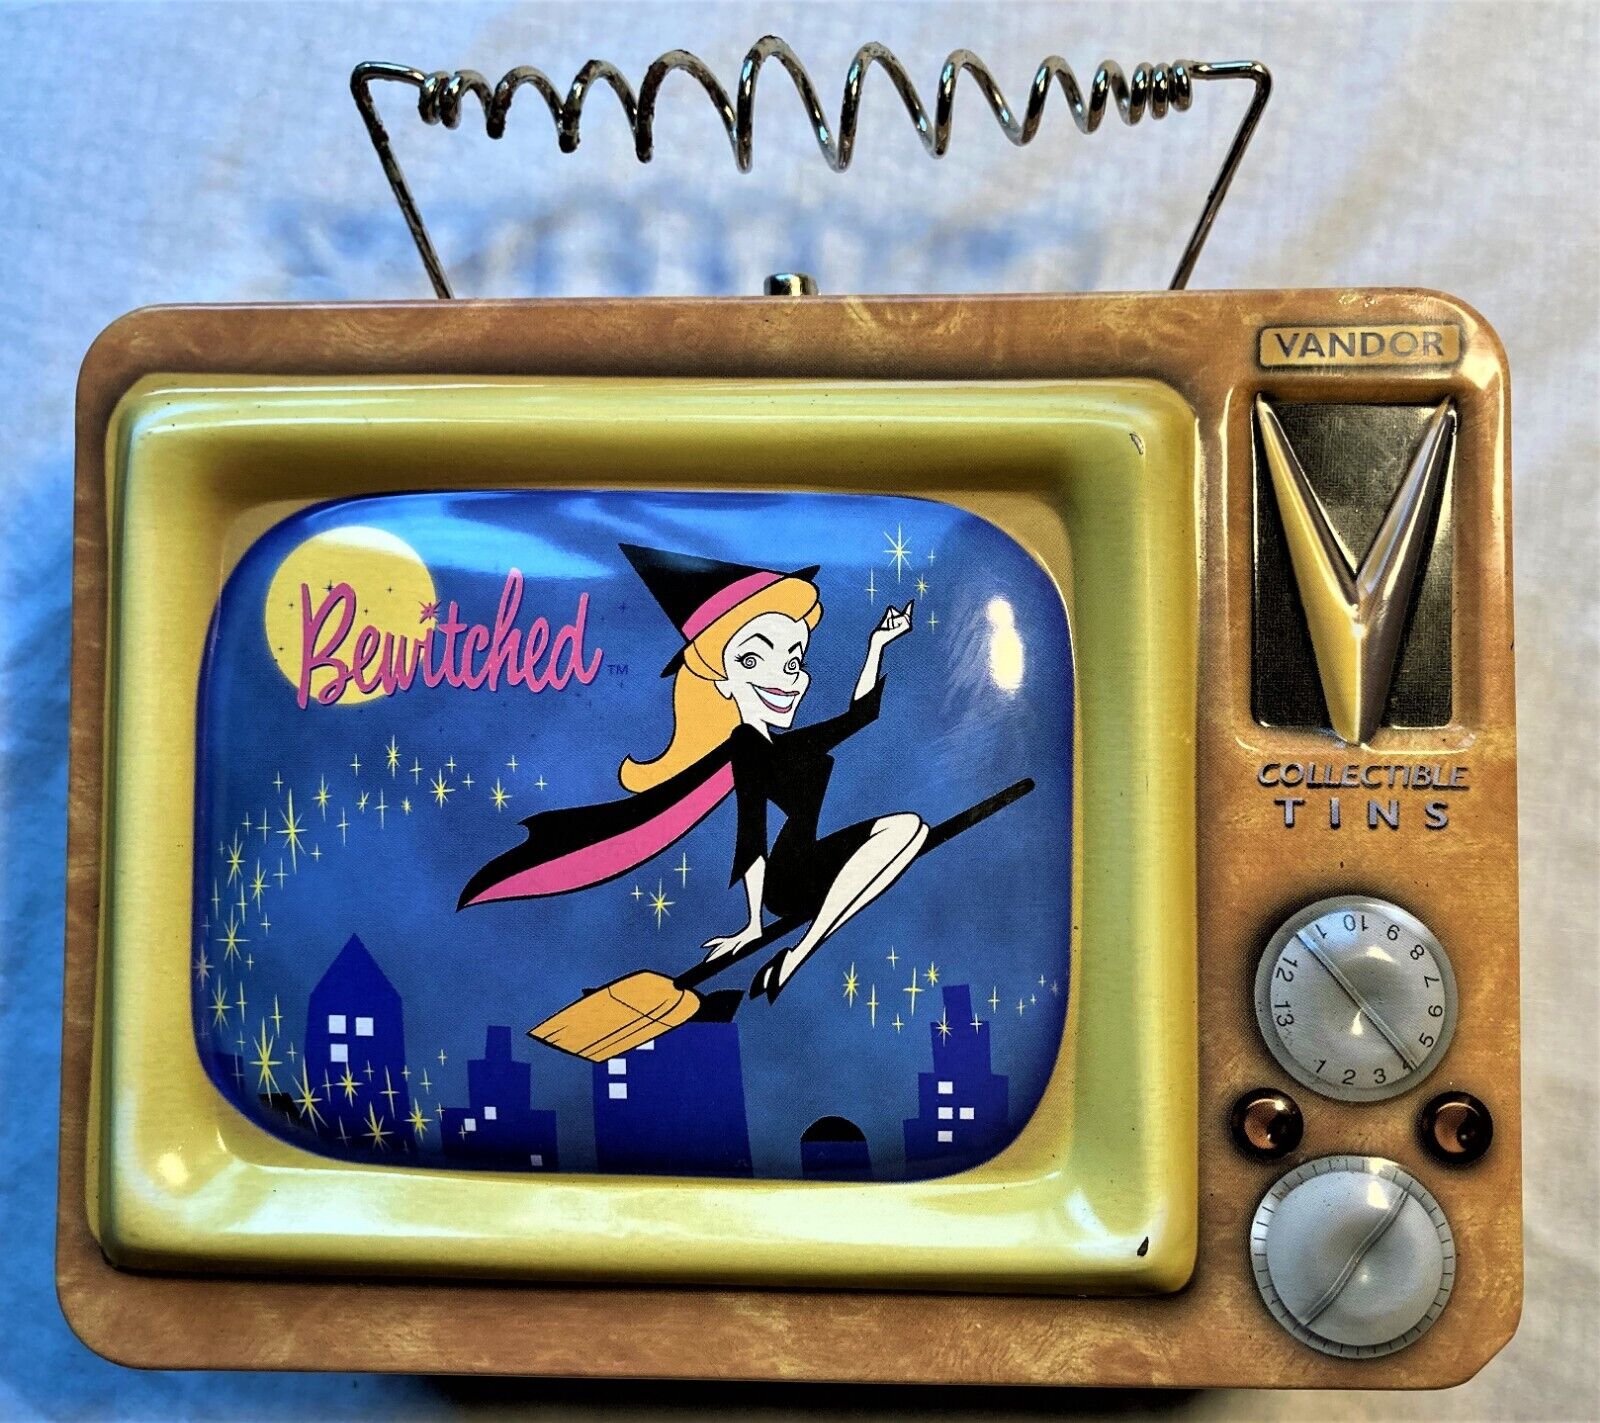 Vintage Bewitched collectable Metal Lunch Box Antenna Handle 1999 Vandor